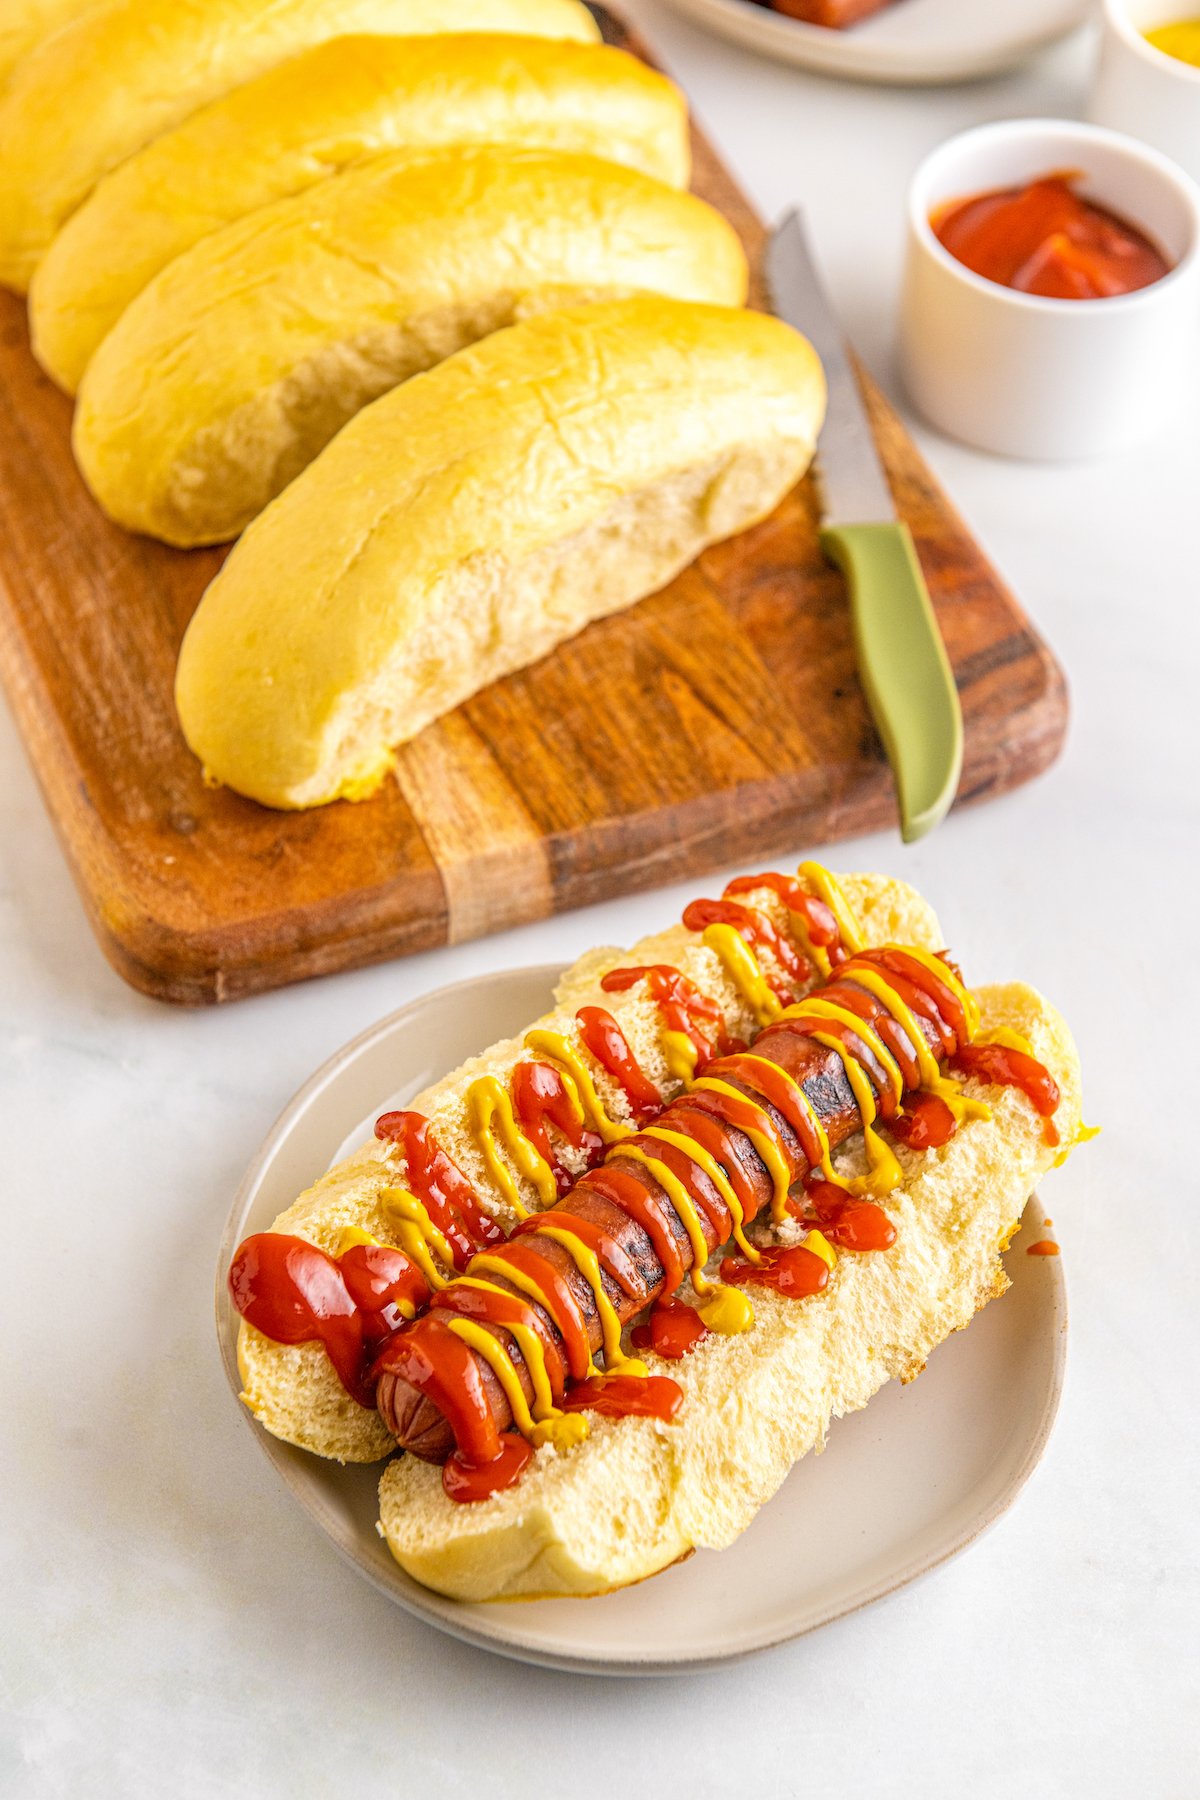 Homemade hot dog buns with one spit open and topped with a frankfurter, ketchup, and mustard.